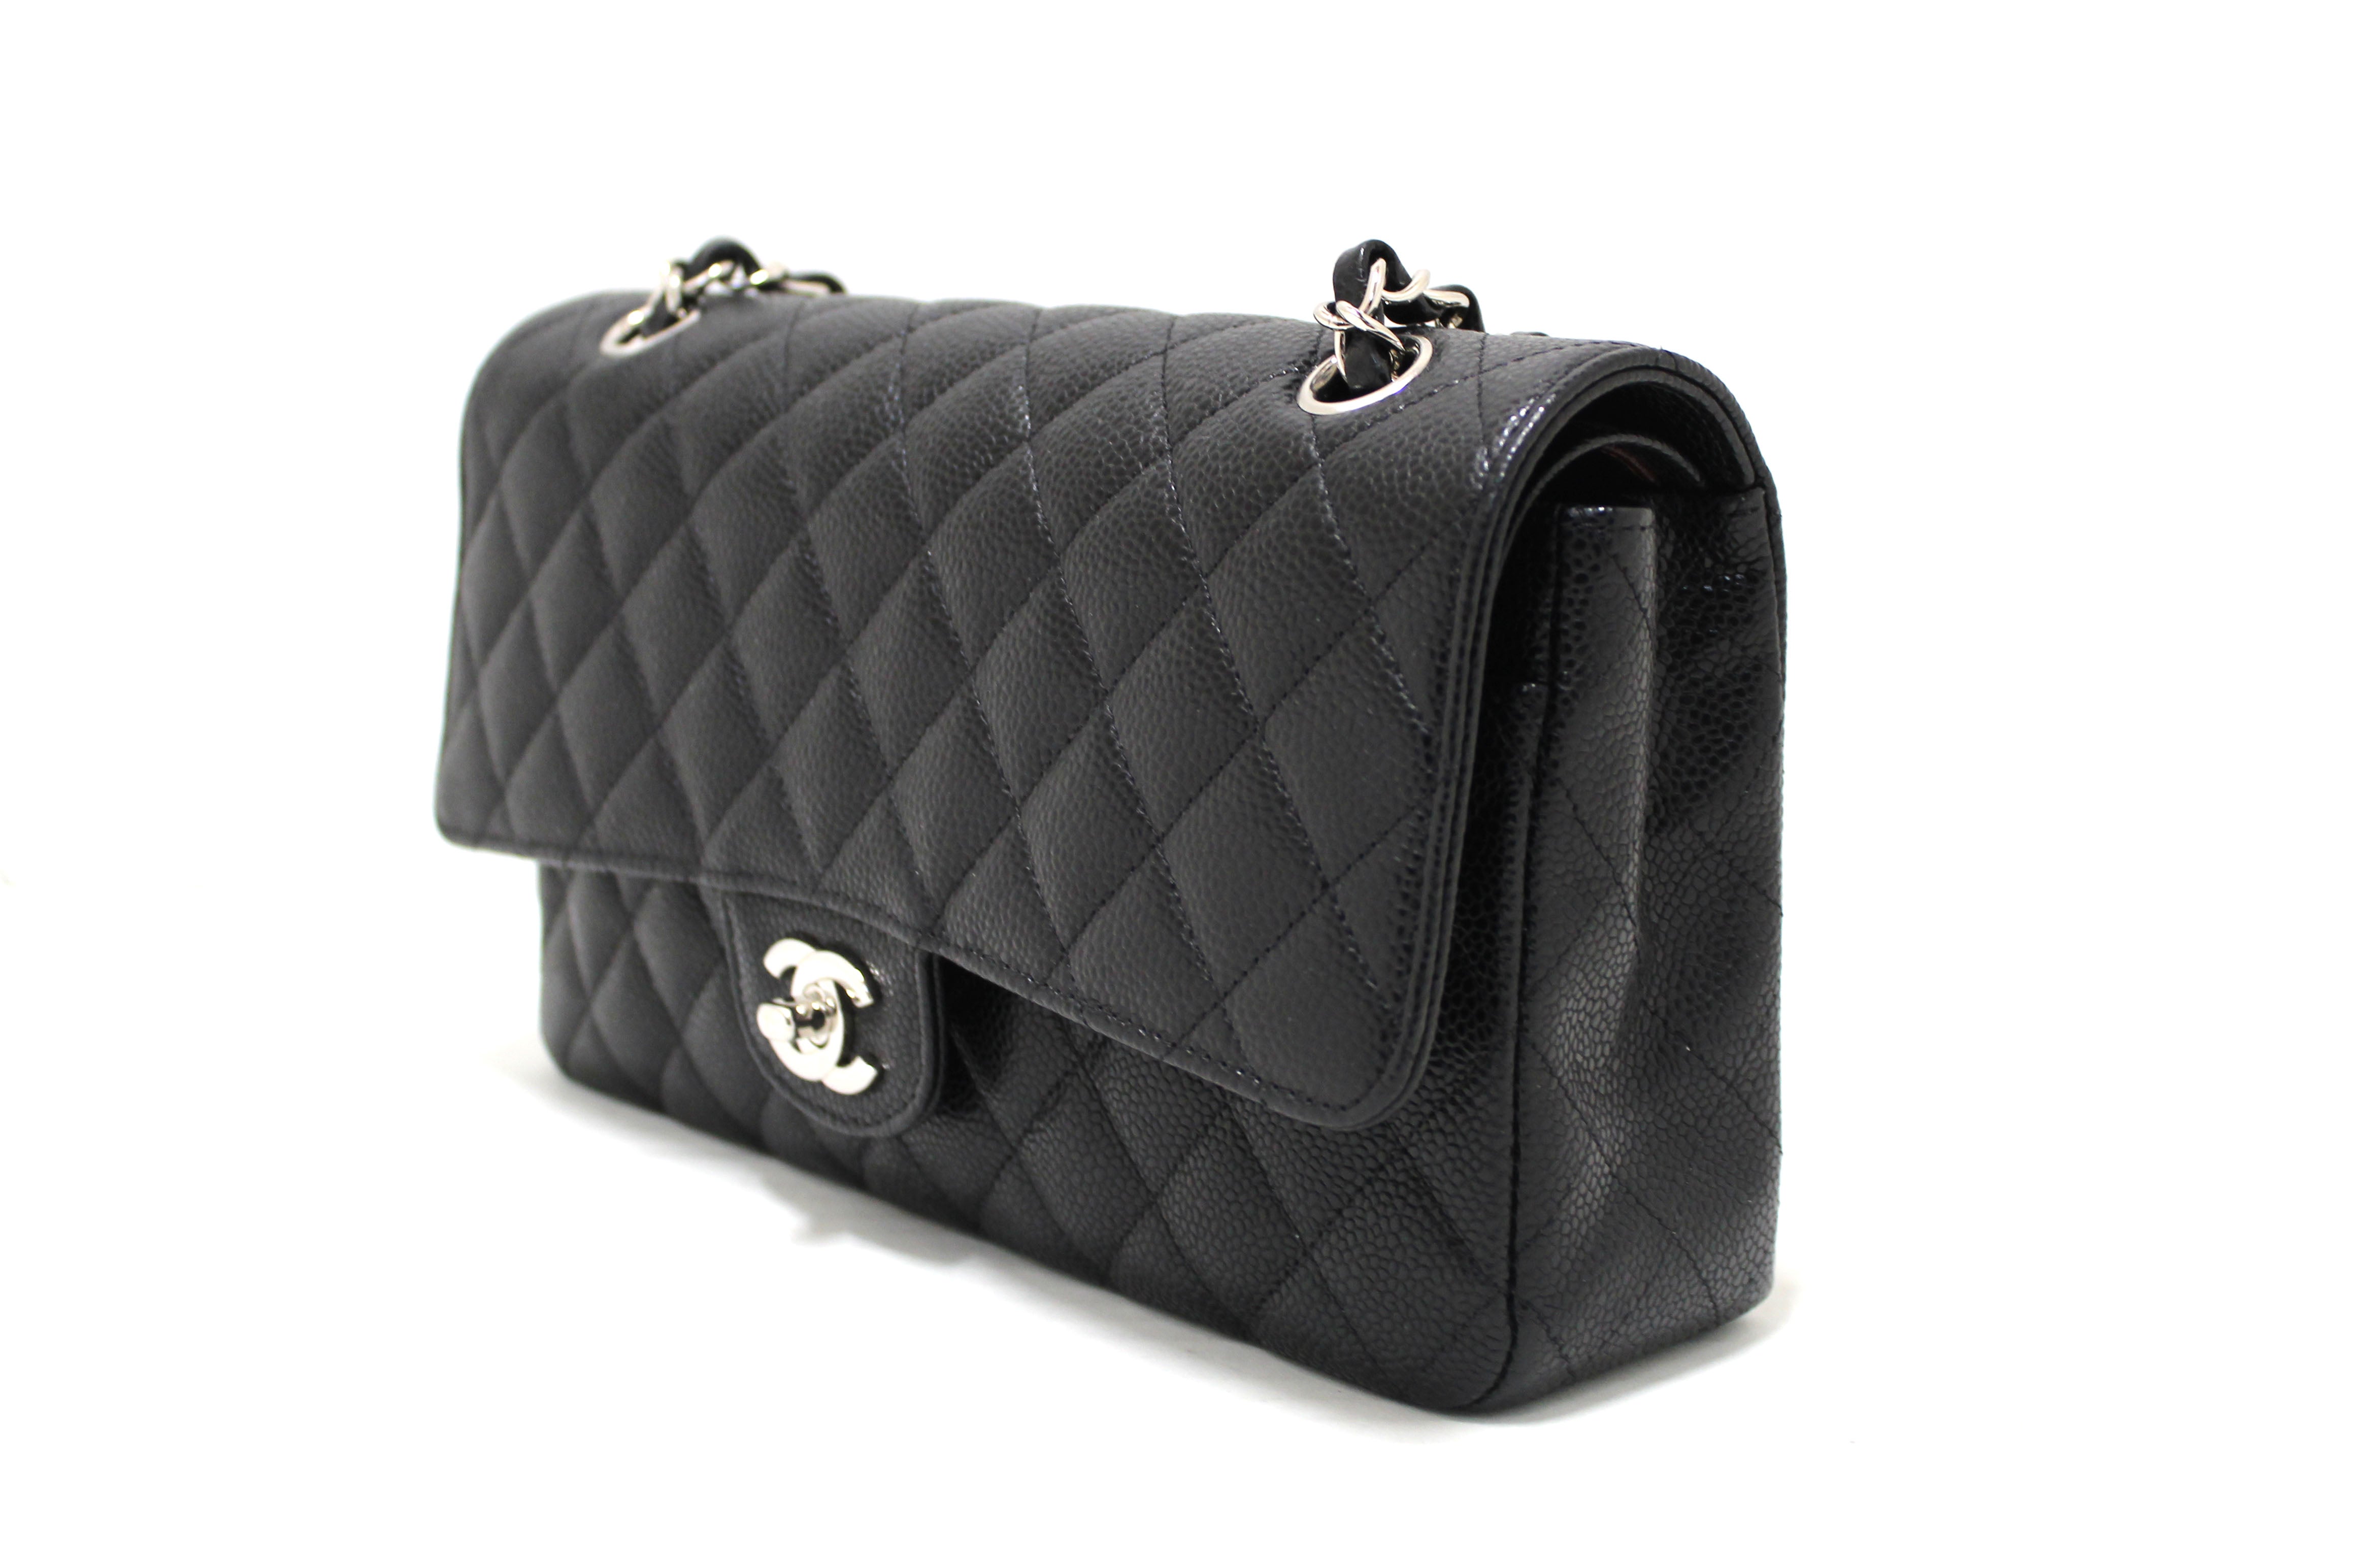 Authentic Chanel Classic Black Quilted Caviar Leather Classic